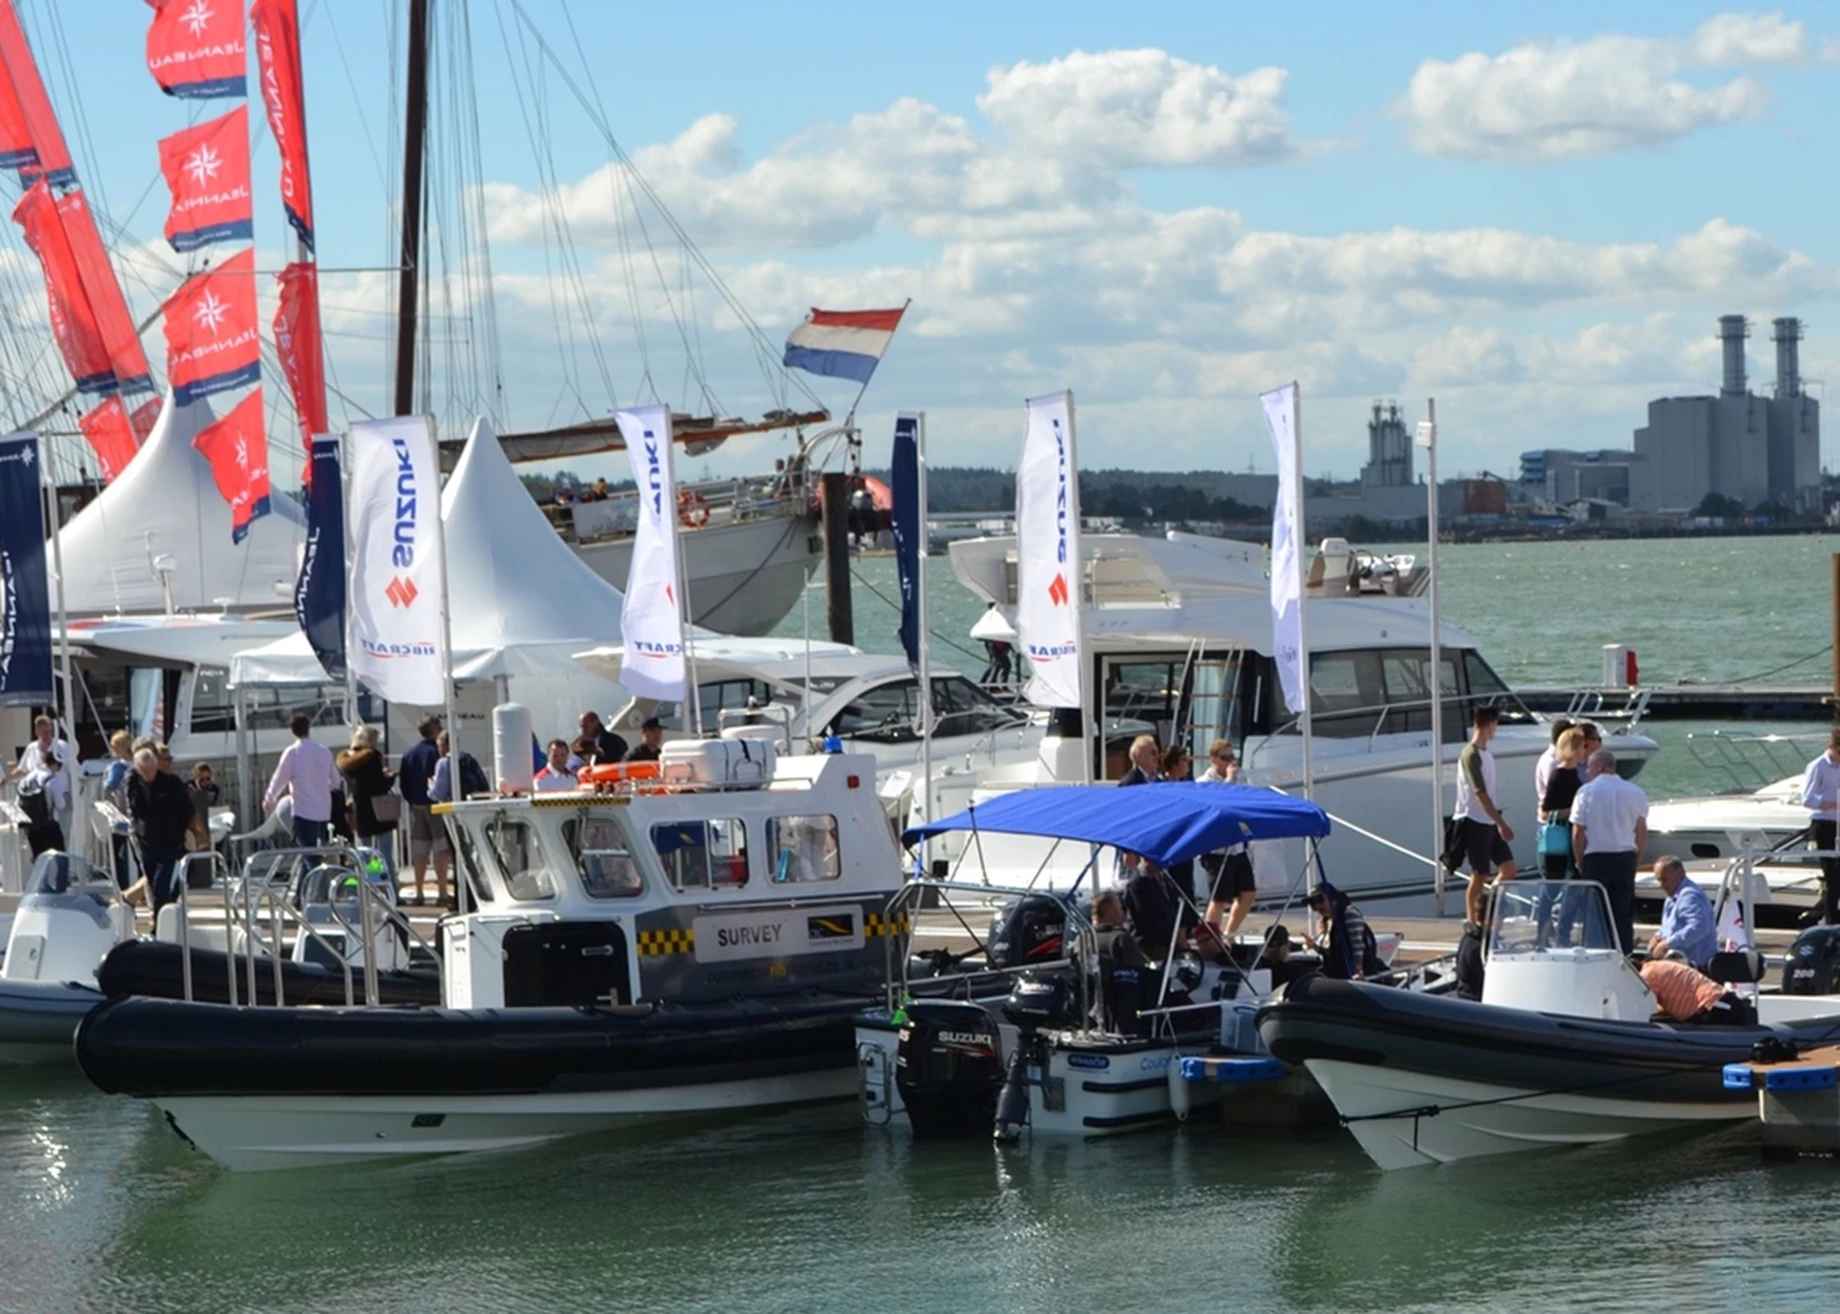 Suzuki-powered boats moored at a boat show.